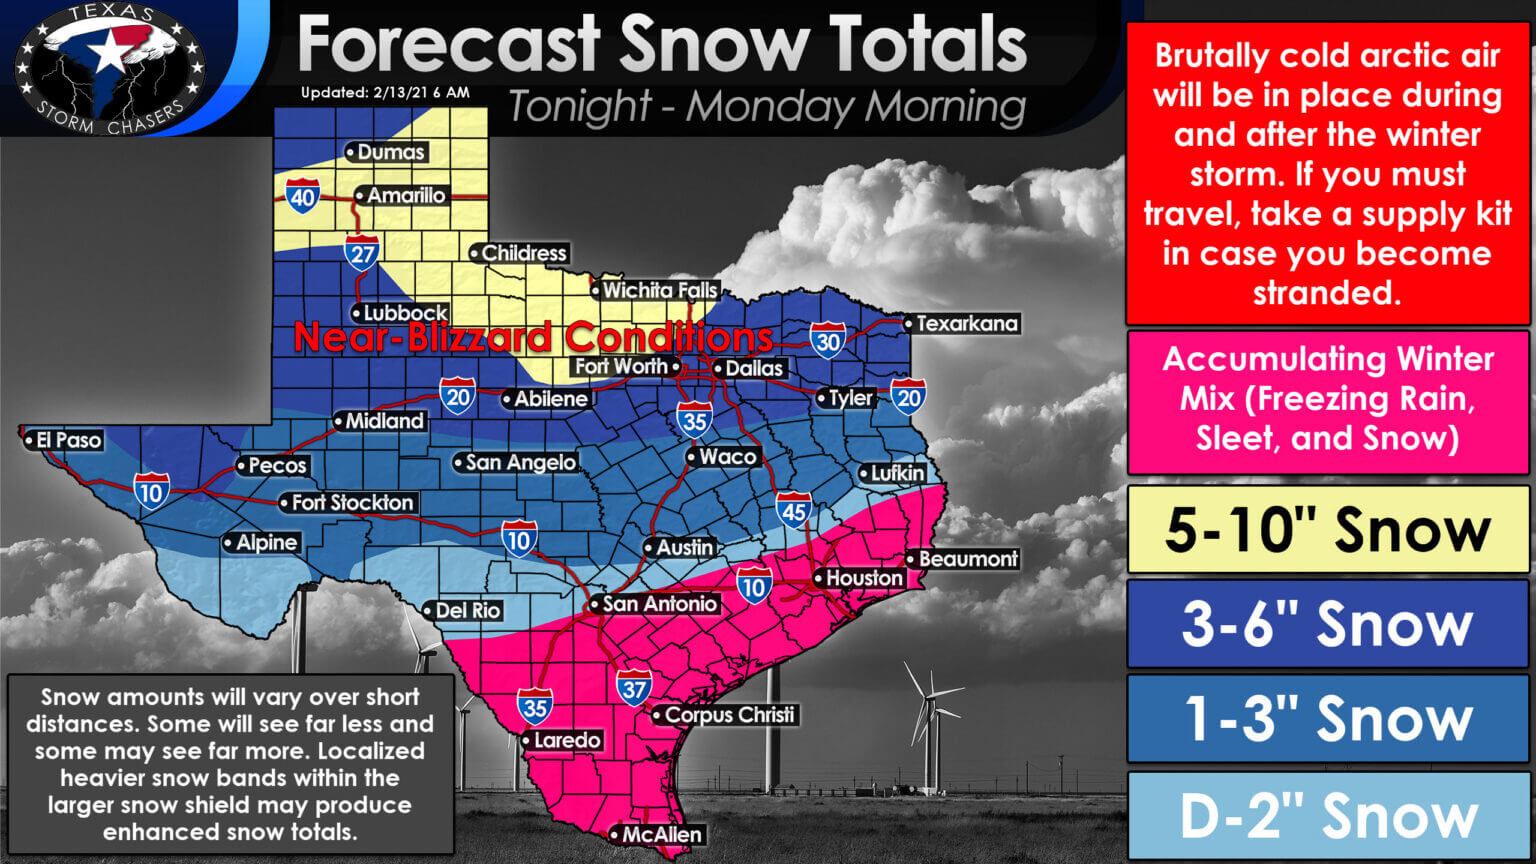 Major Winter Storm for all 254 Texas Counties Tonight, Sunday, and Monday